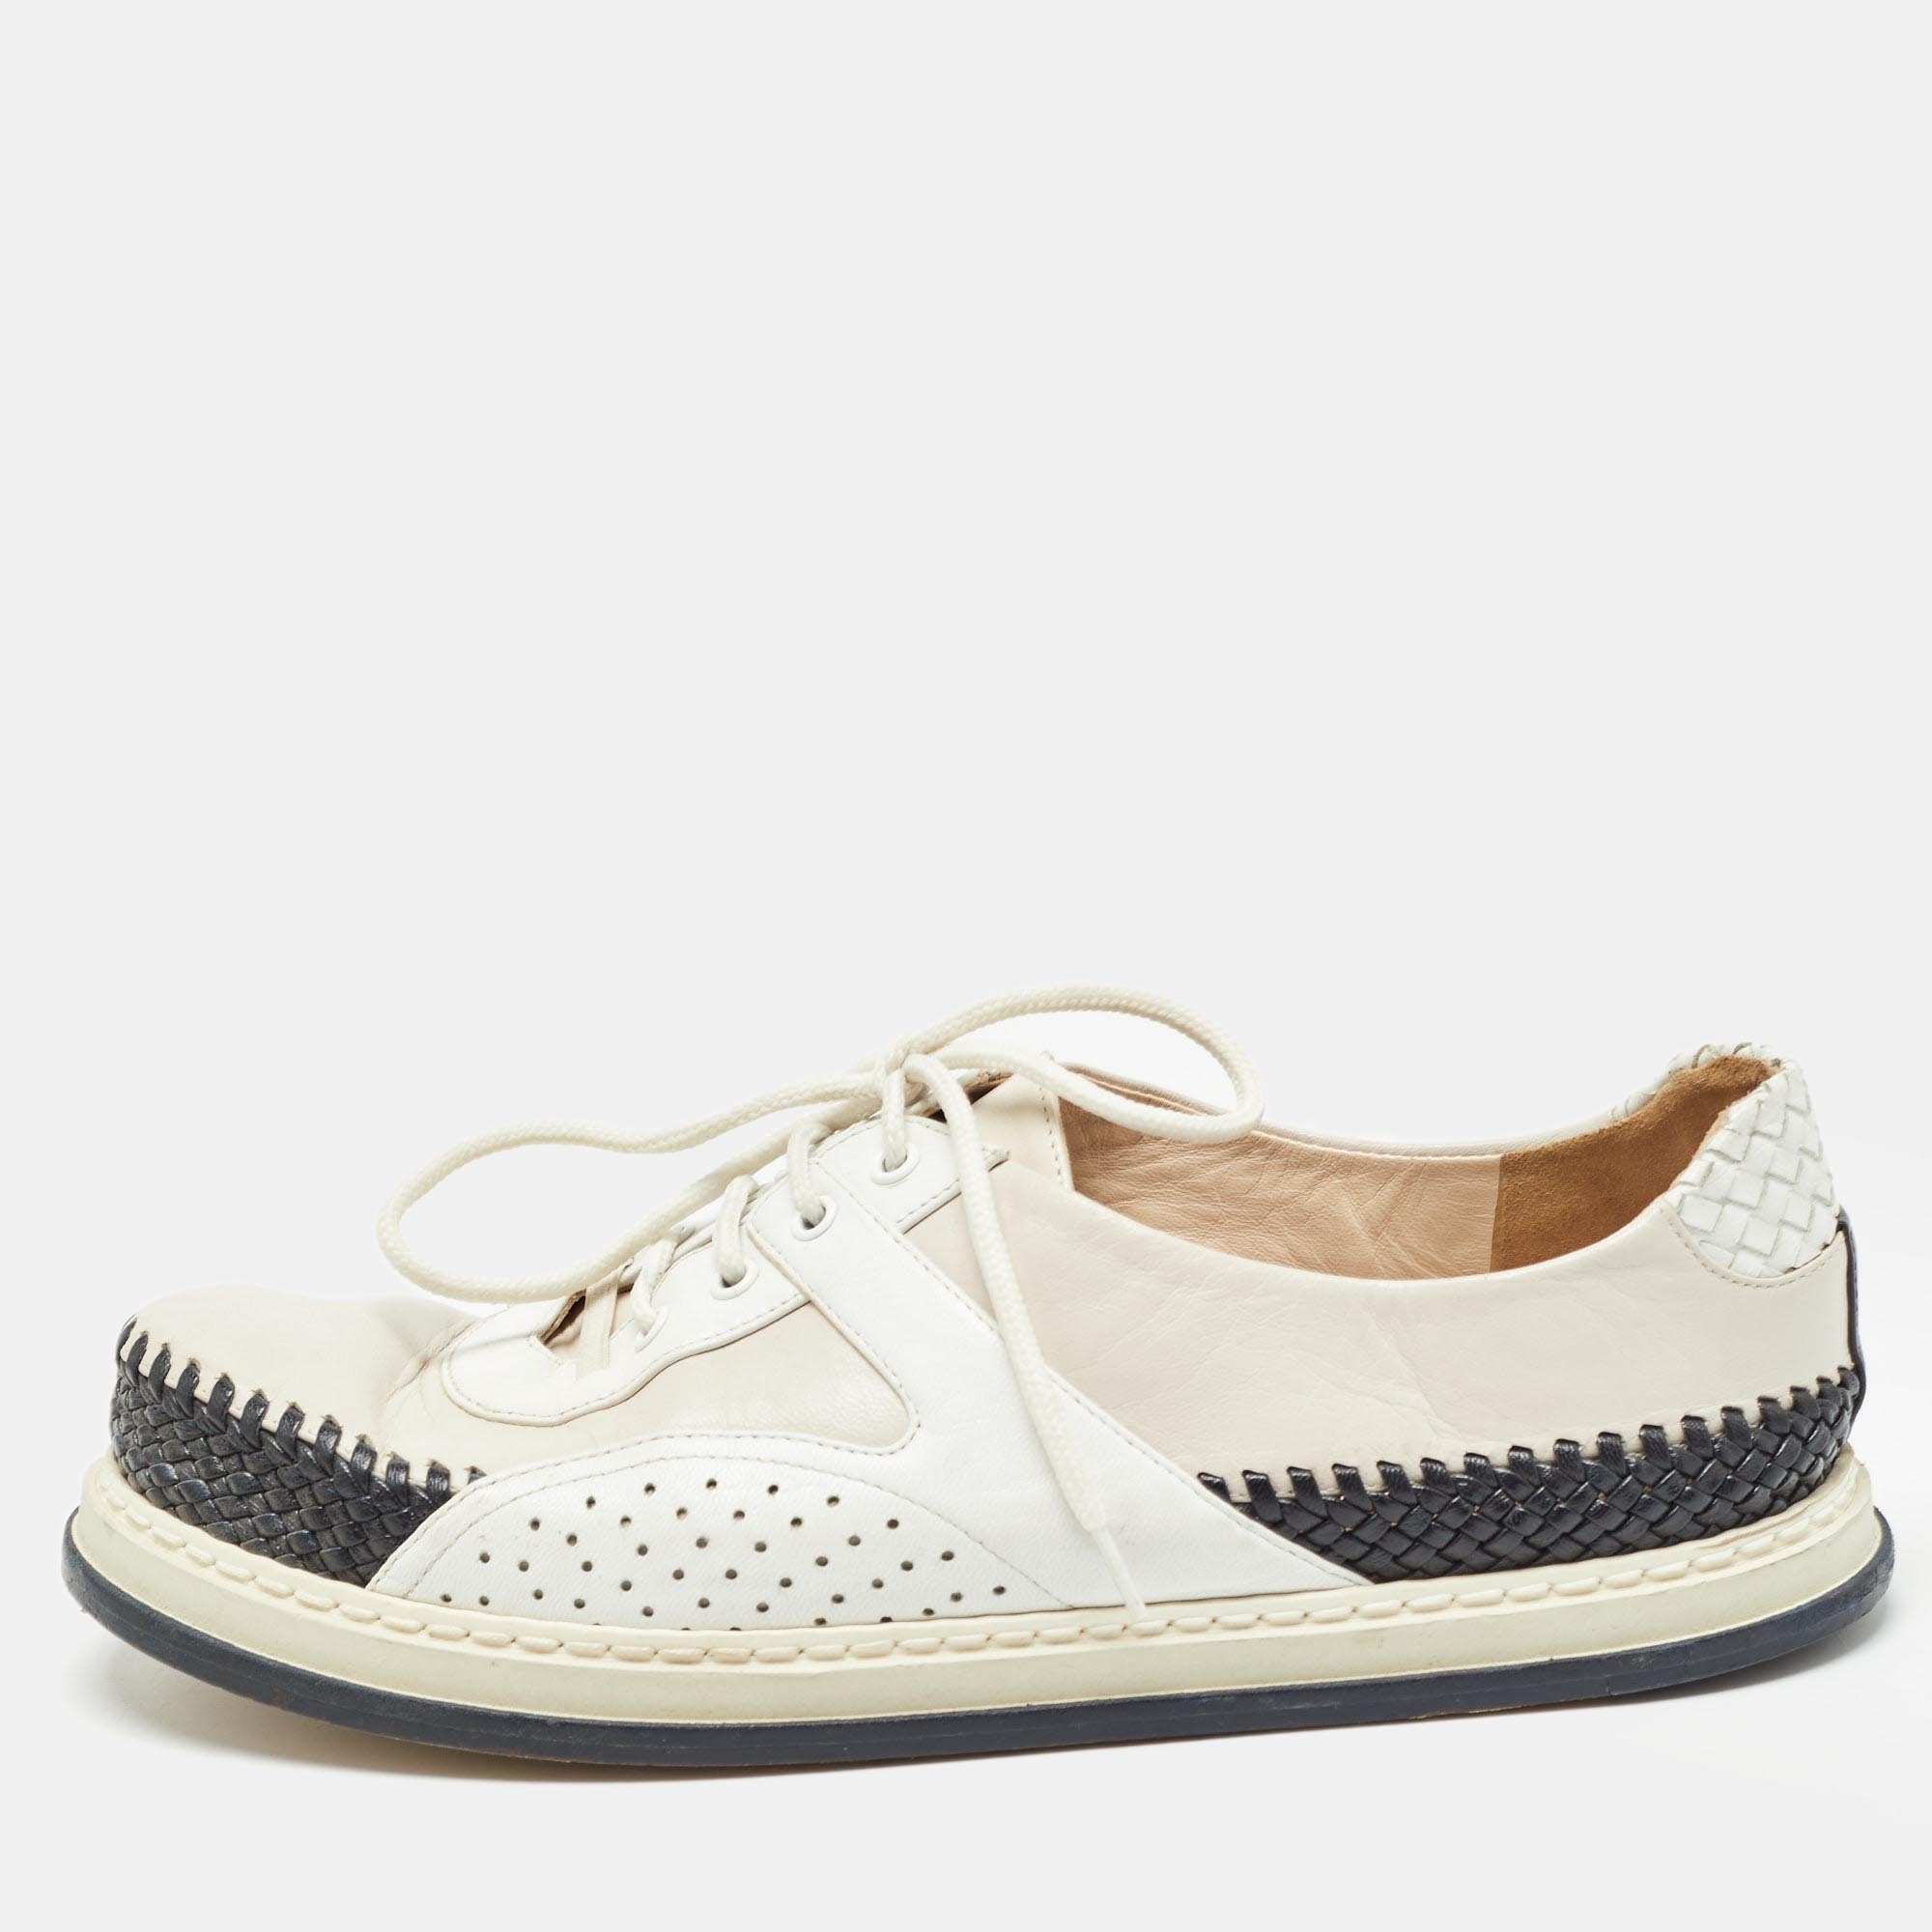 

Bottega Veneta Tricolor Woven Leather and Leather Lace Up Sneakers Size, Cream